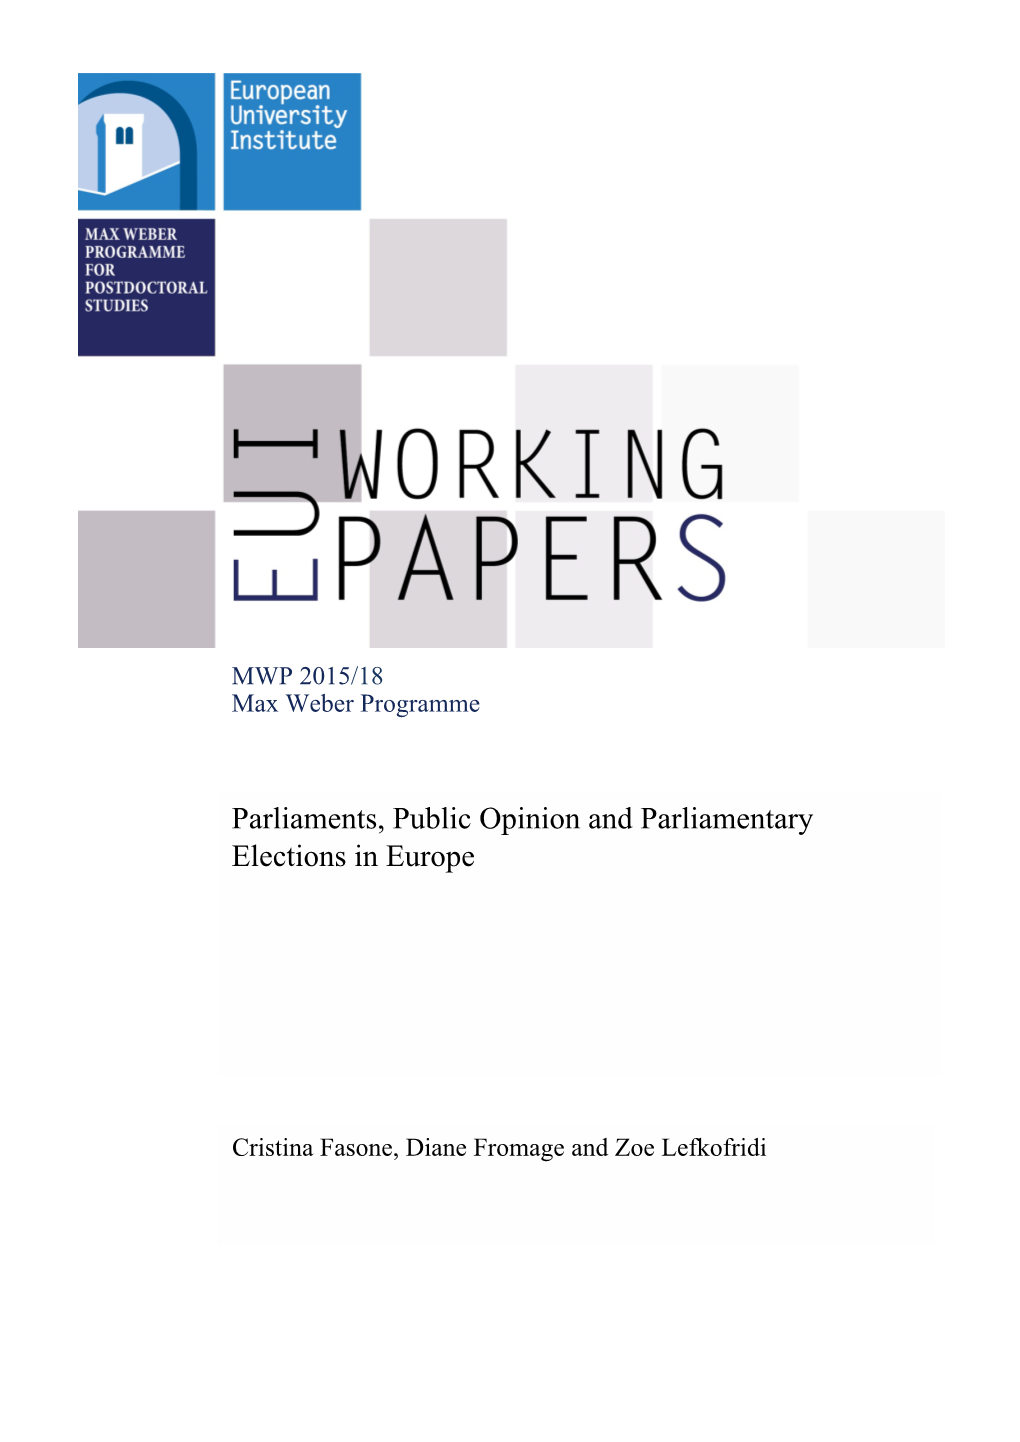 Parliaments, Public Opinion and Parliamentary Elections in Europe